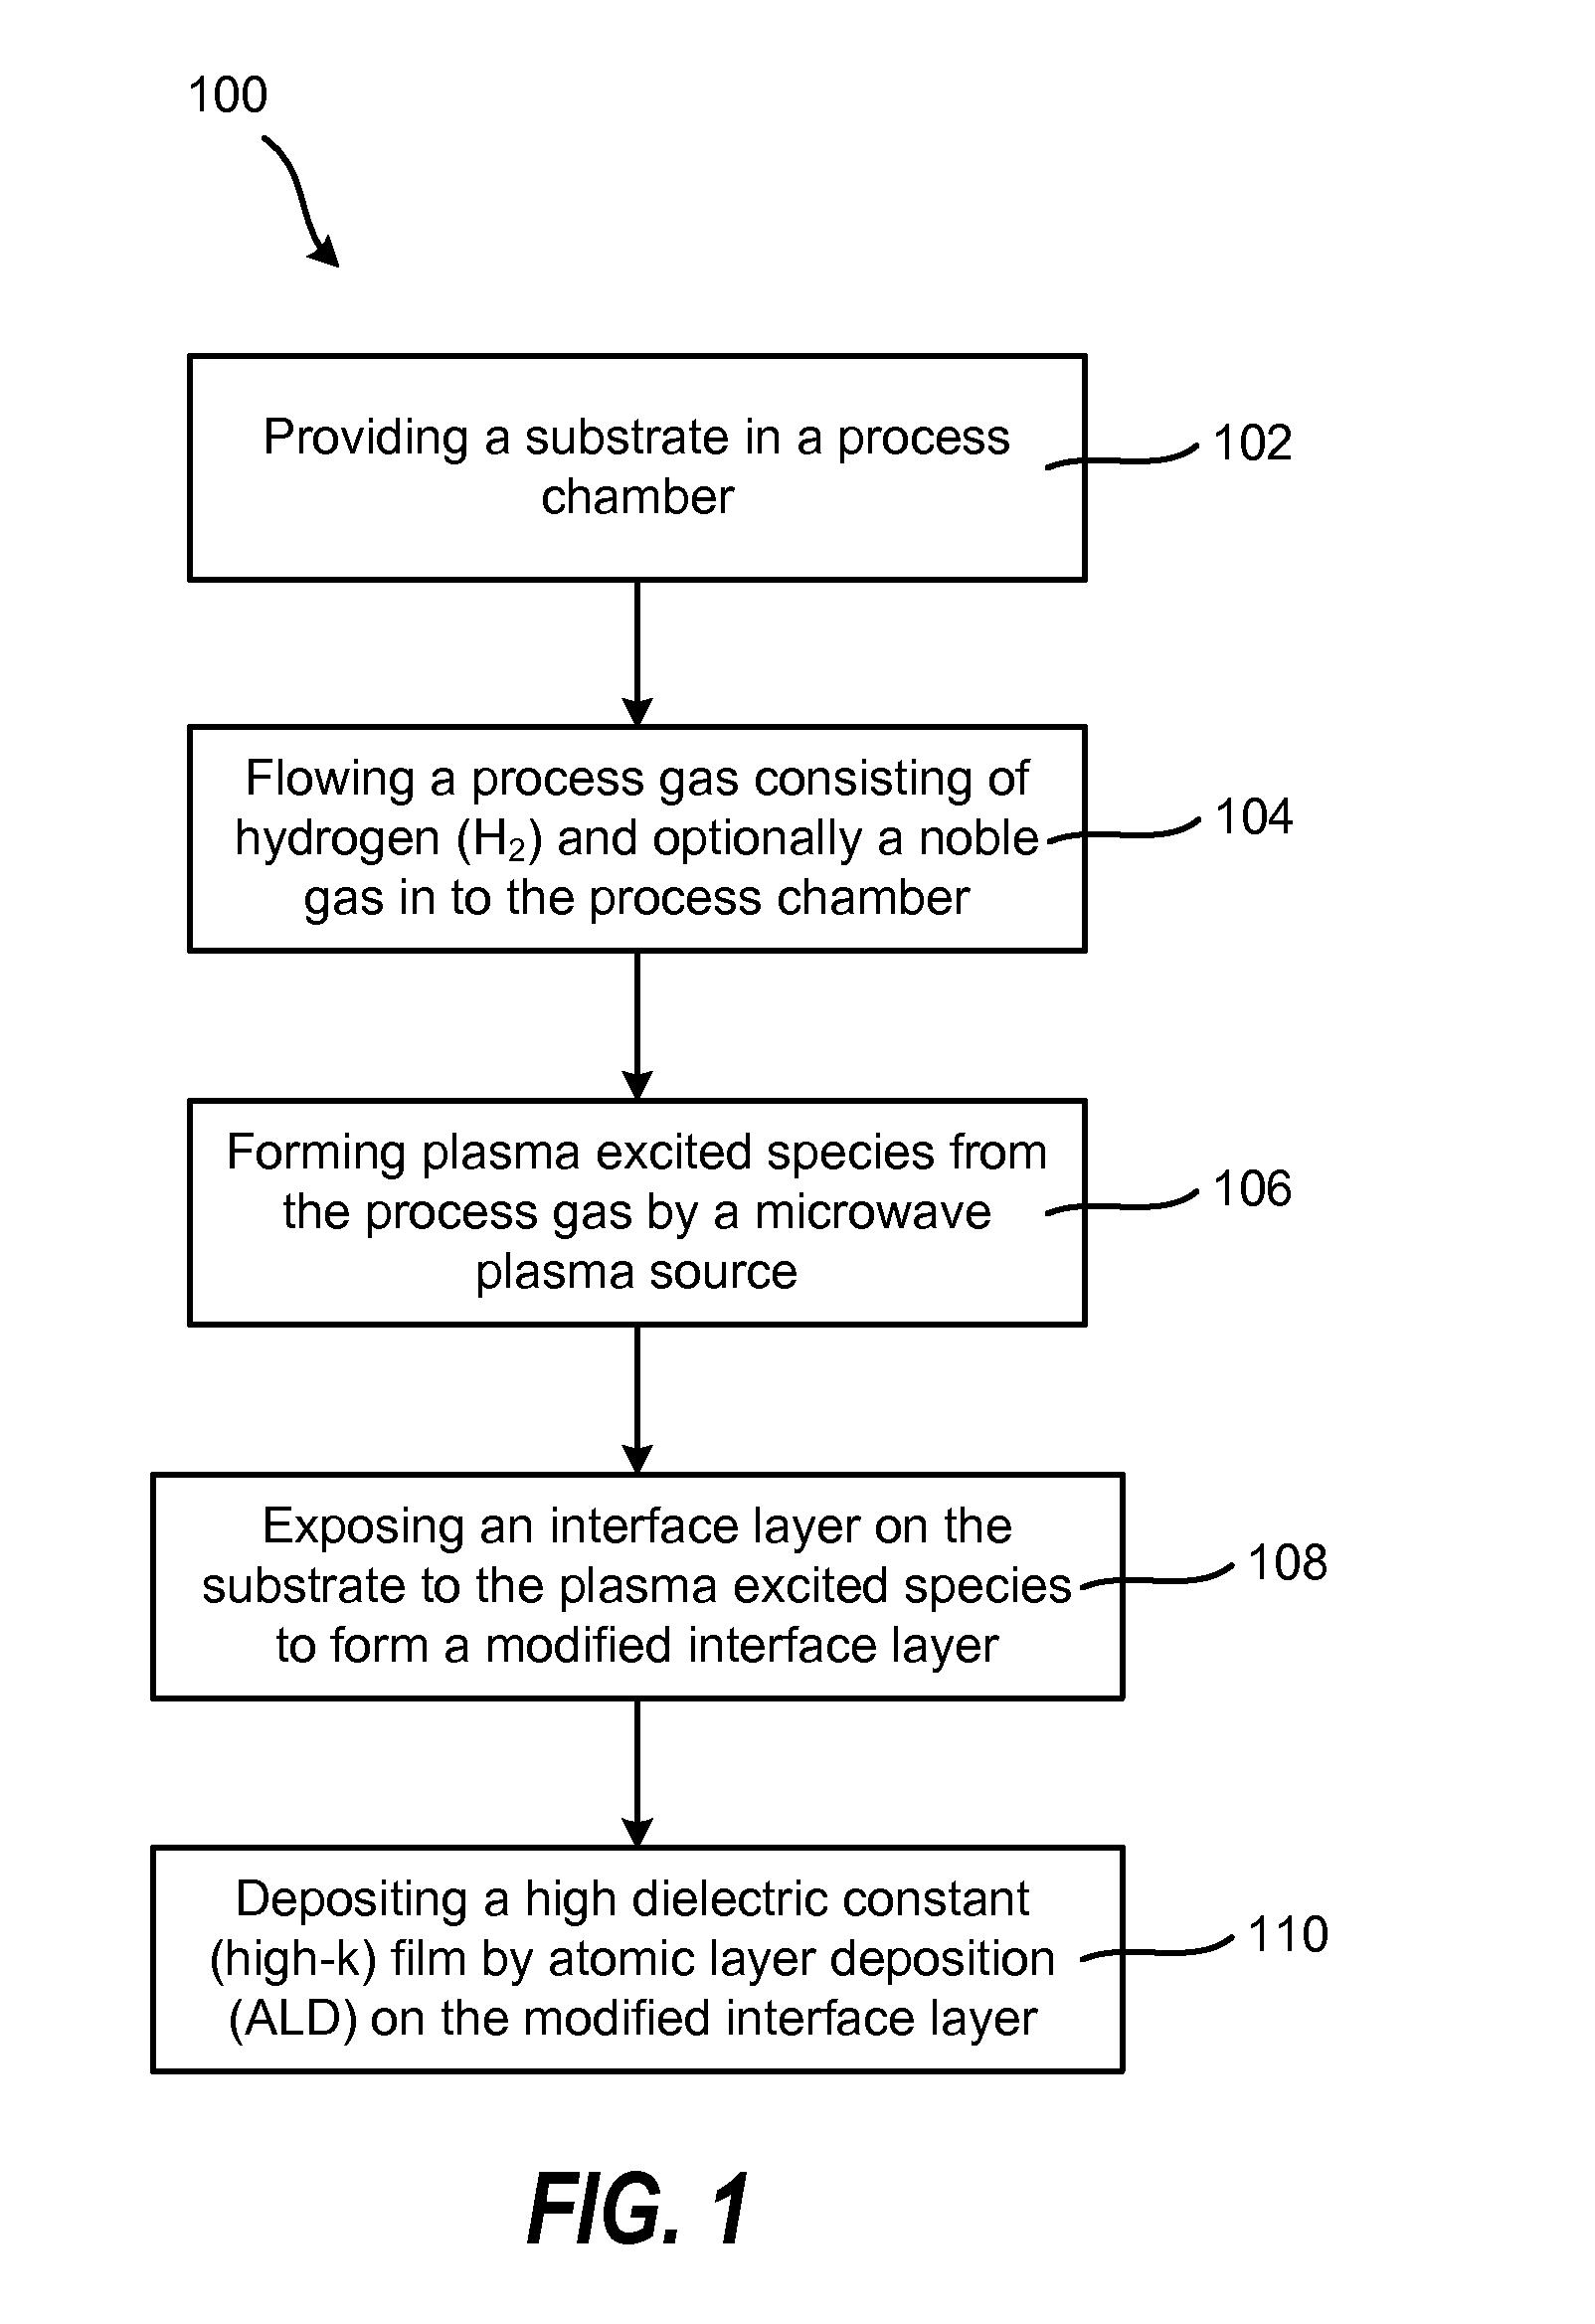 METHOD OF ENHANCING HIGH-k FILM NUCLEATION RATE AND ELECTRICAL MOBILITY IN A SEMICONDUCTOR DEVICE BY MICROWAVE PLASMA TREATMENT